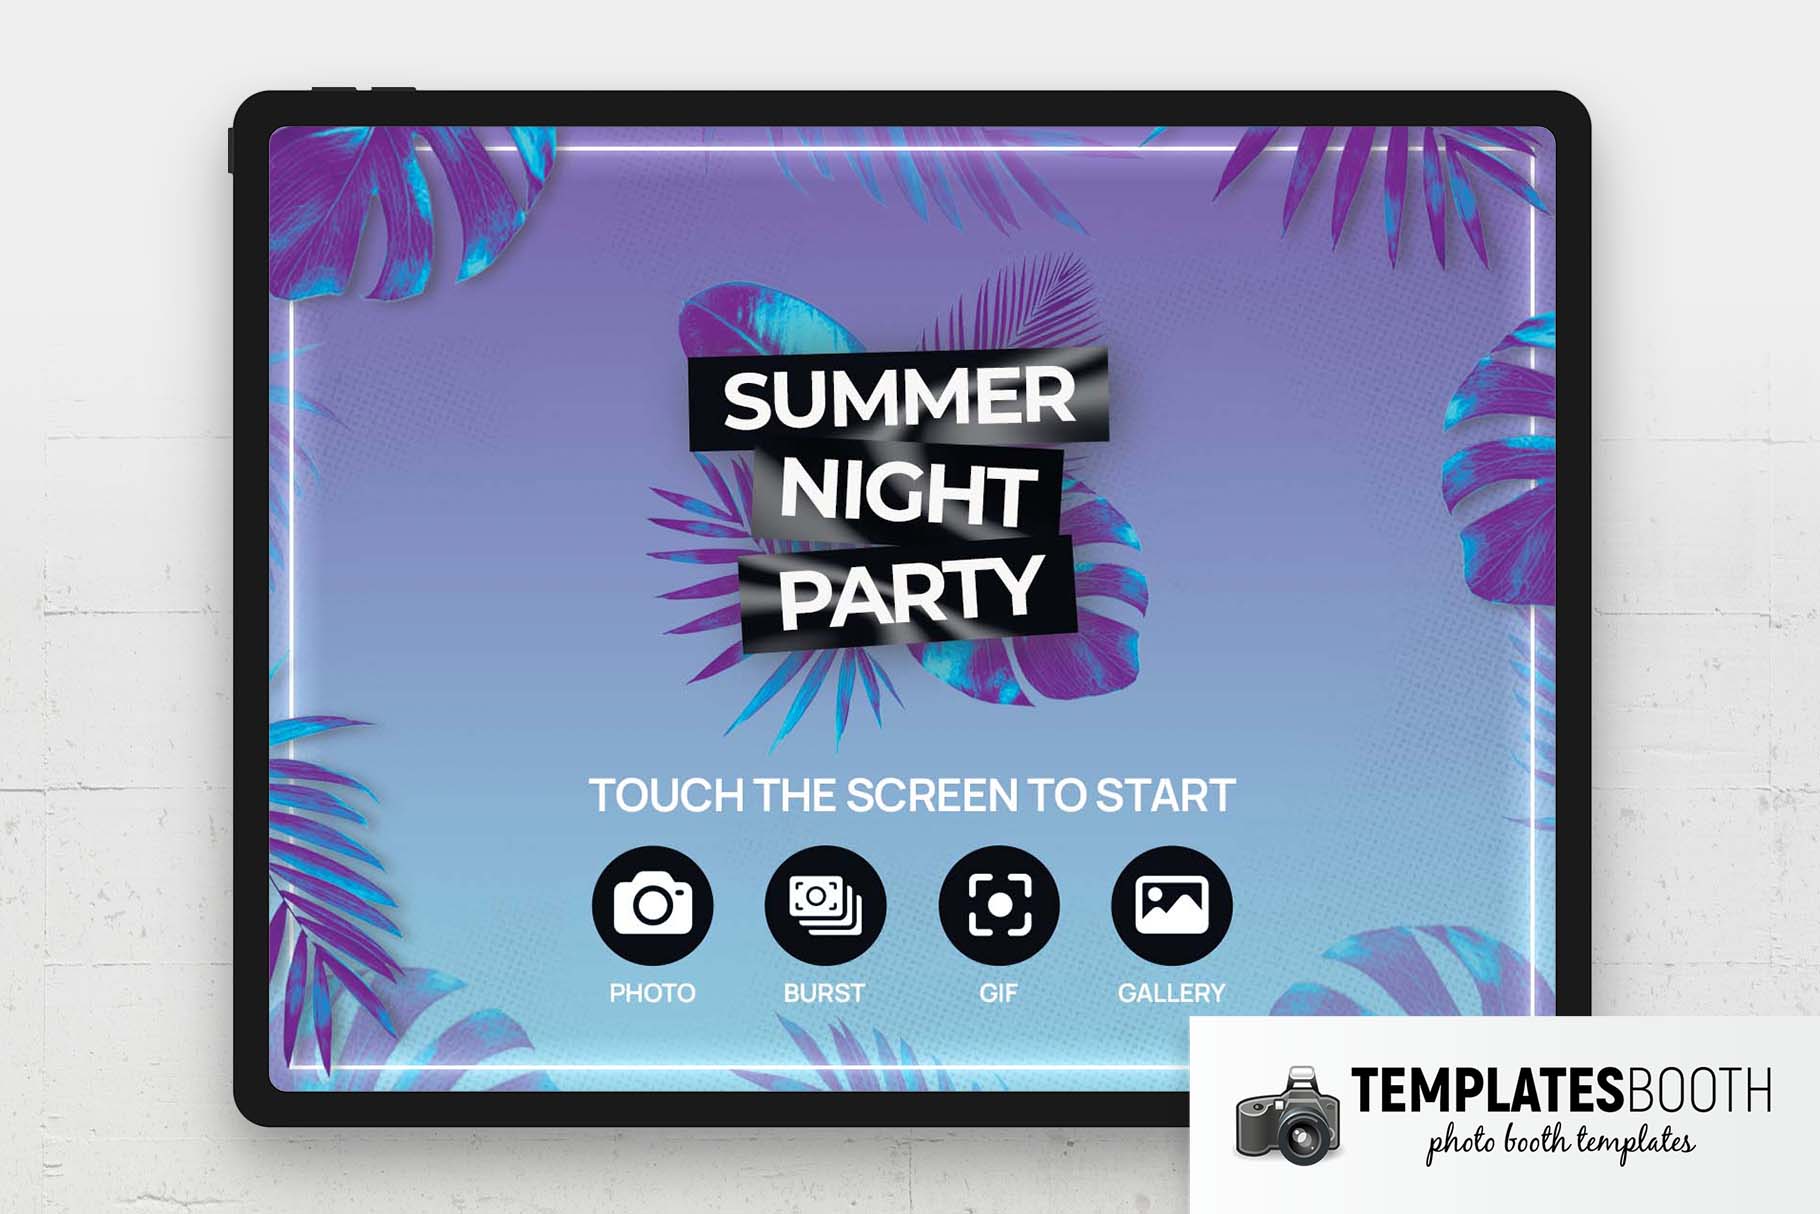 Summer Nightclub Party Photo Booth Welcome Screen